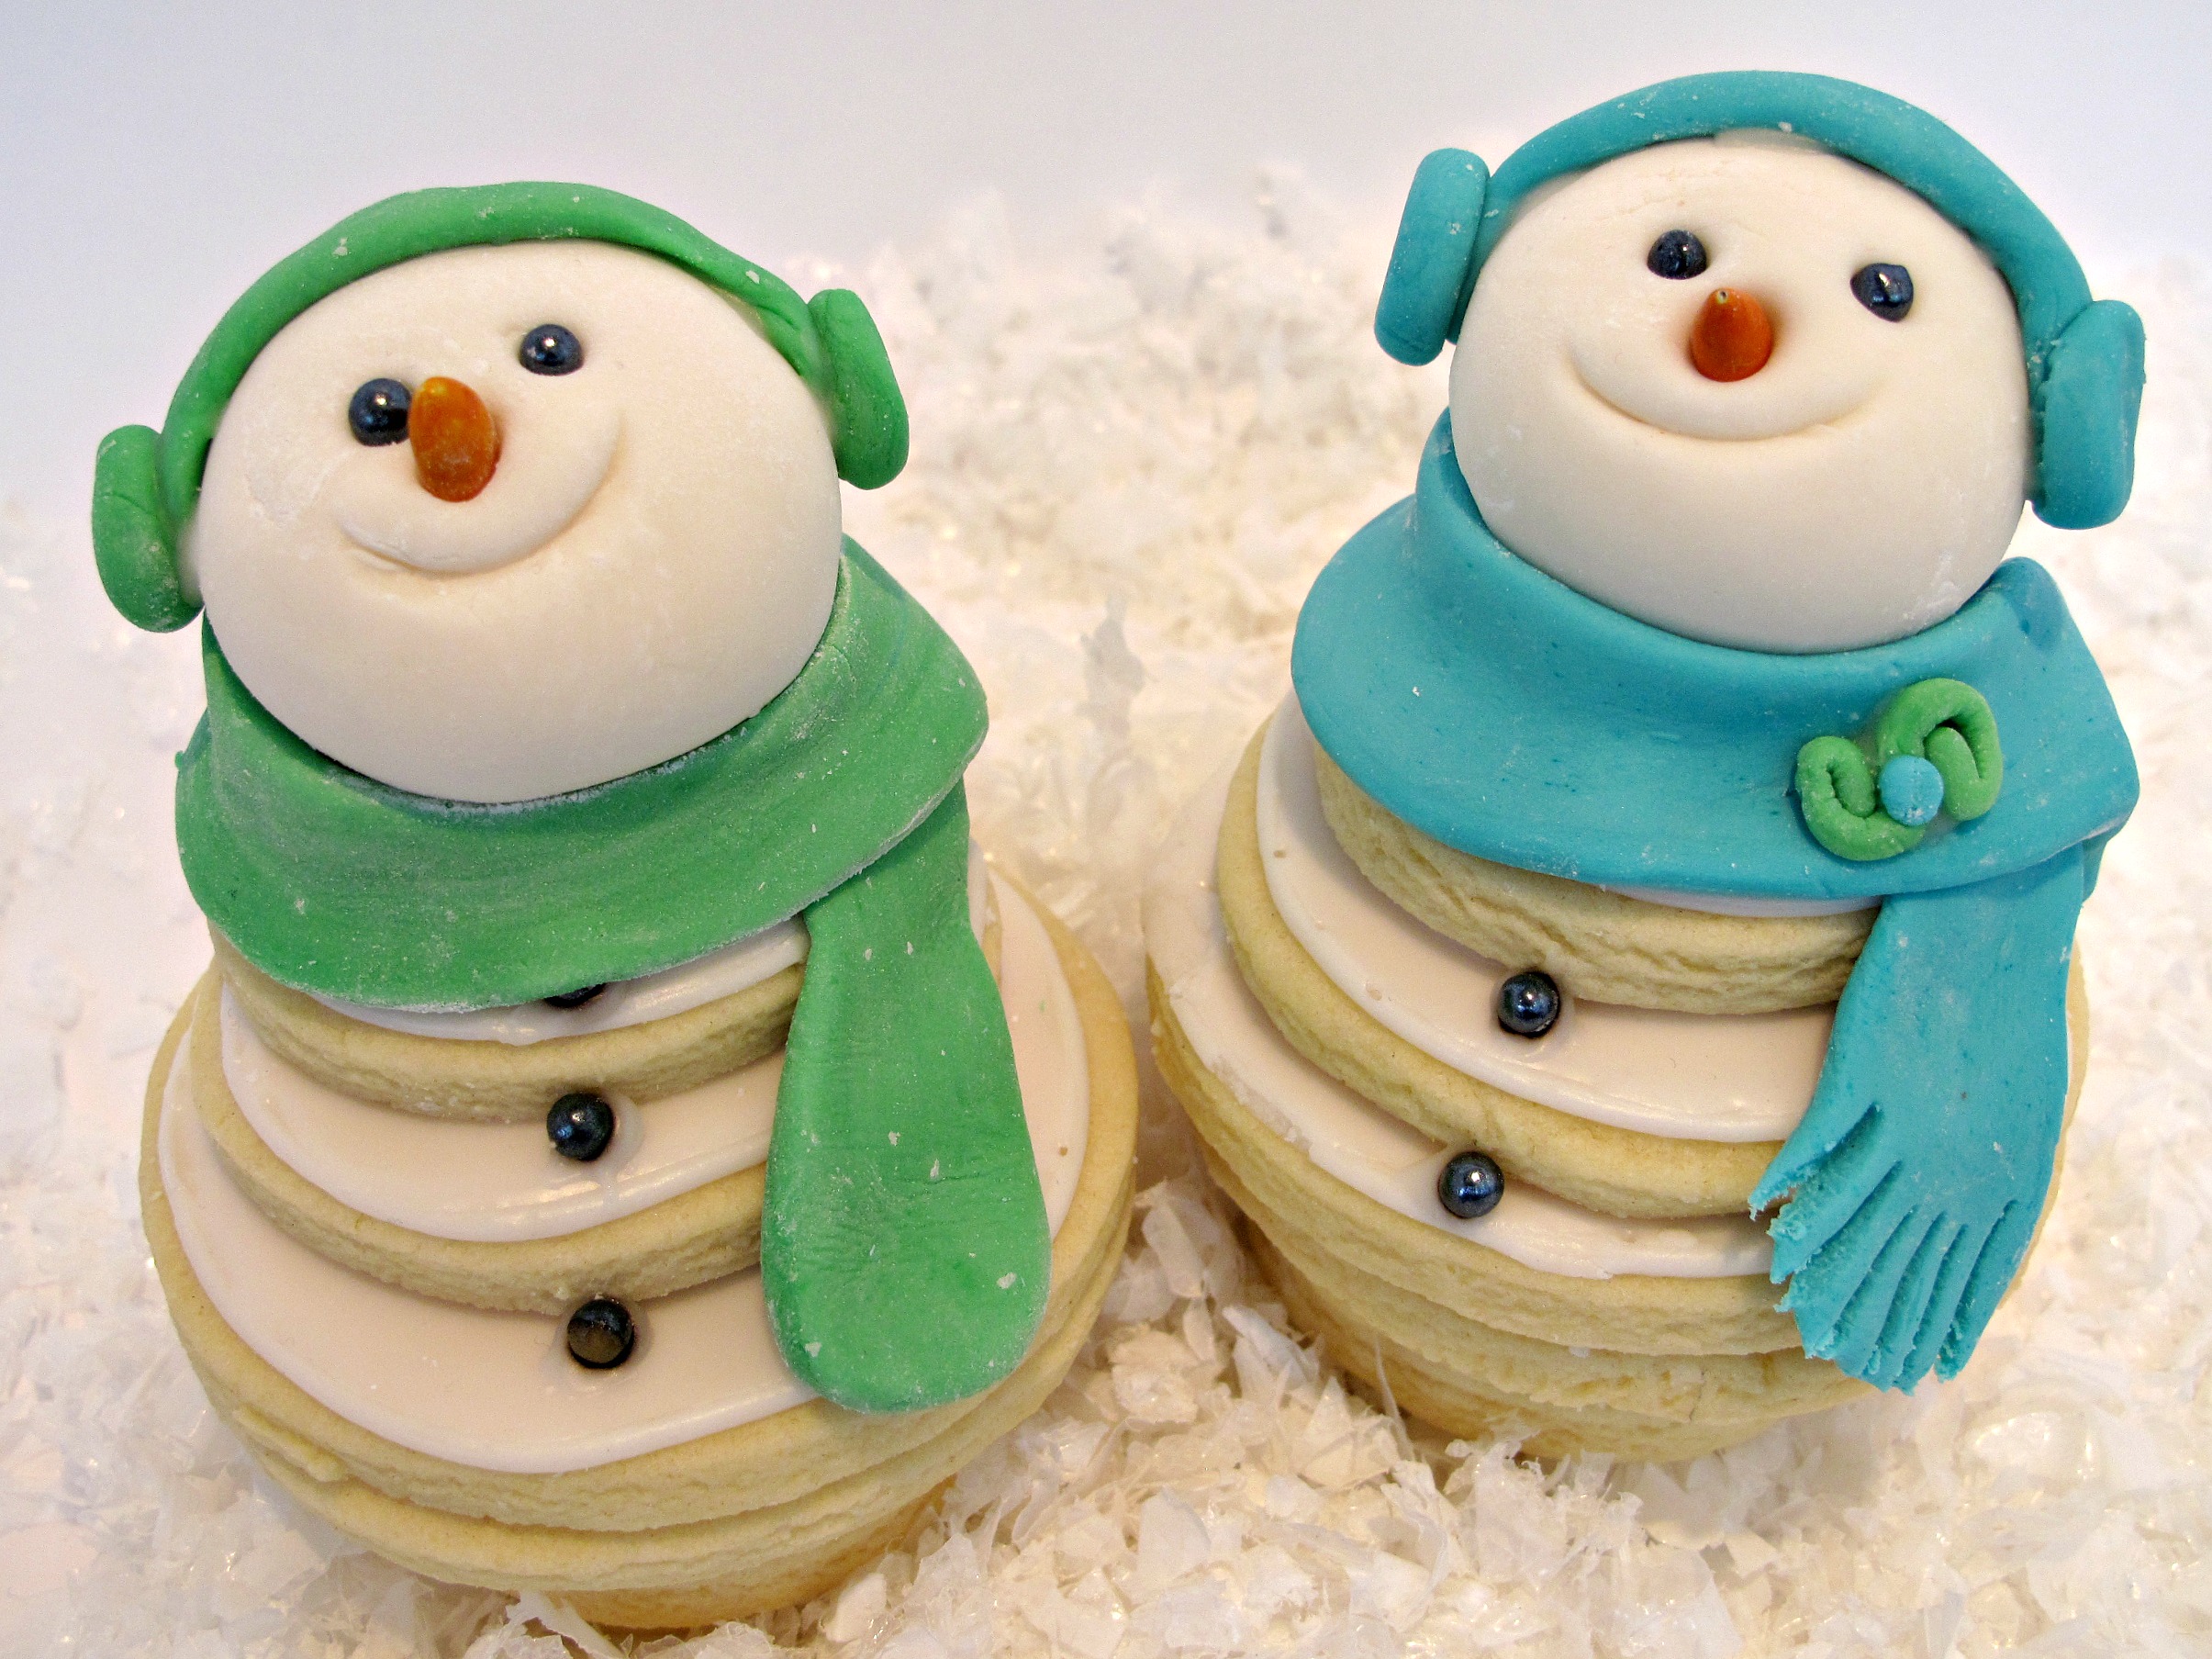 Cookie stacks decorated with fondant details.